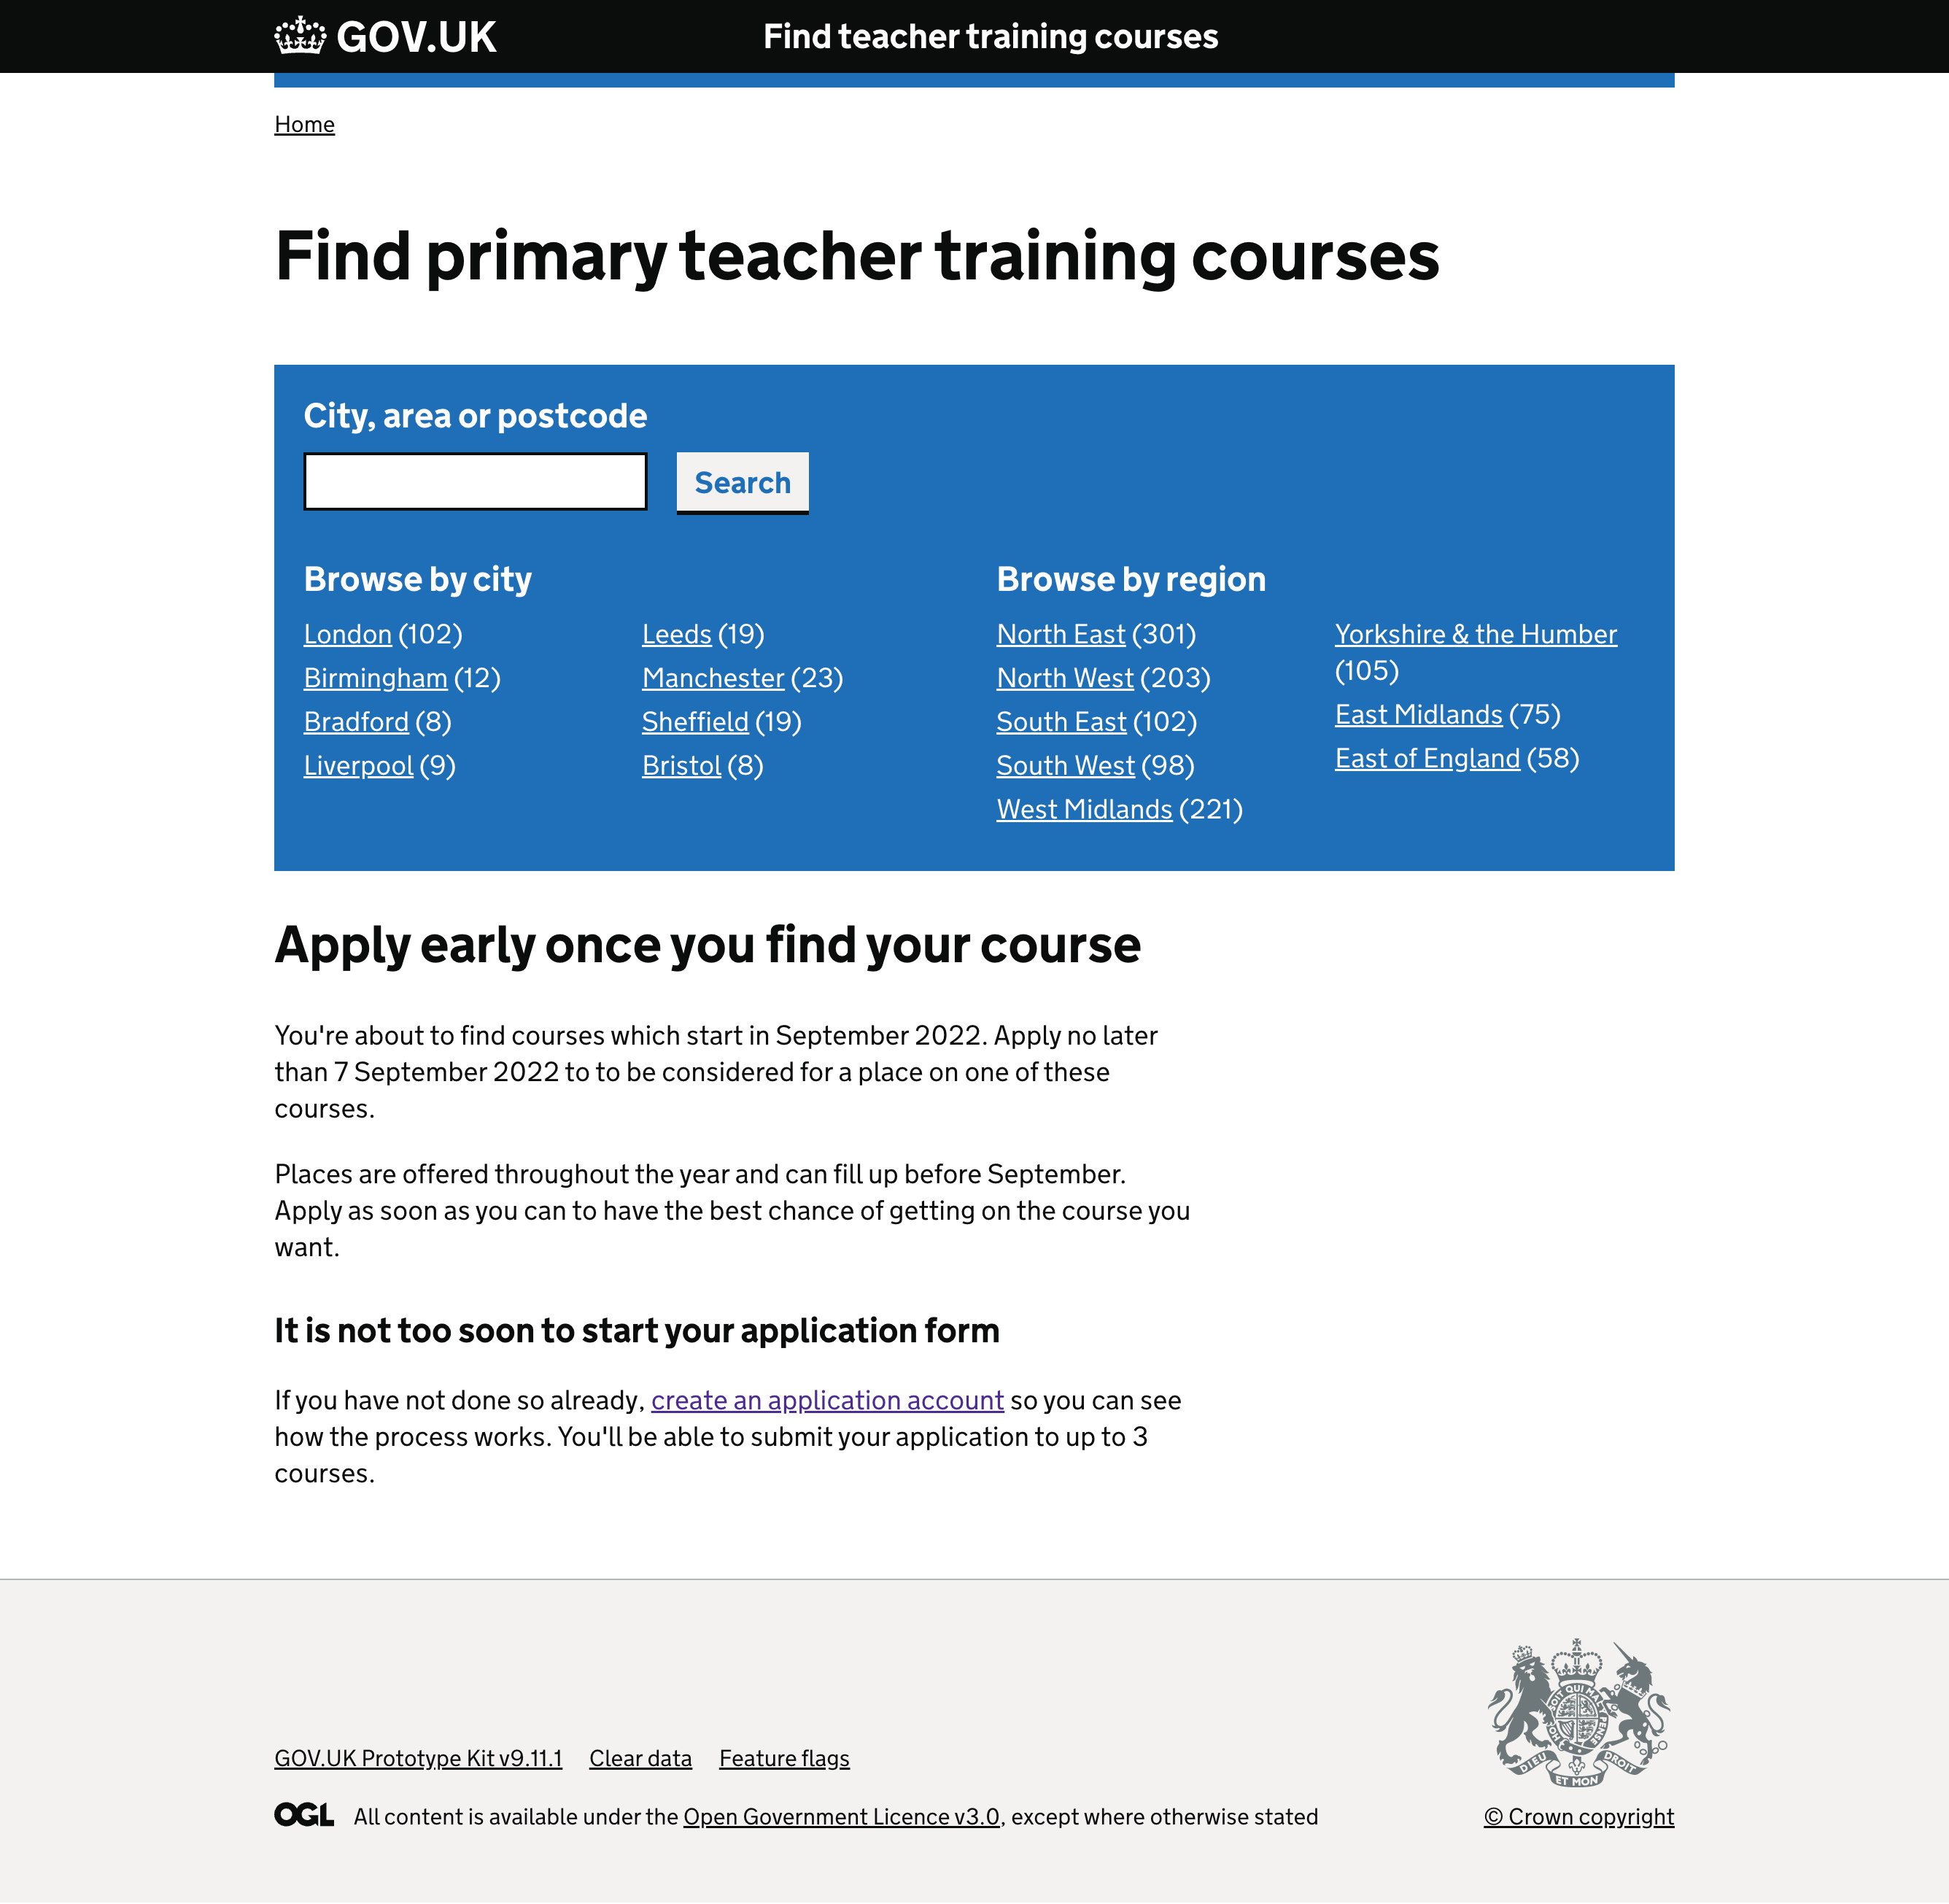 Screenshot showing page titled 'Find primary teacher training courses'